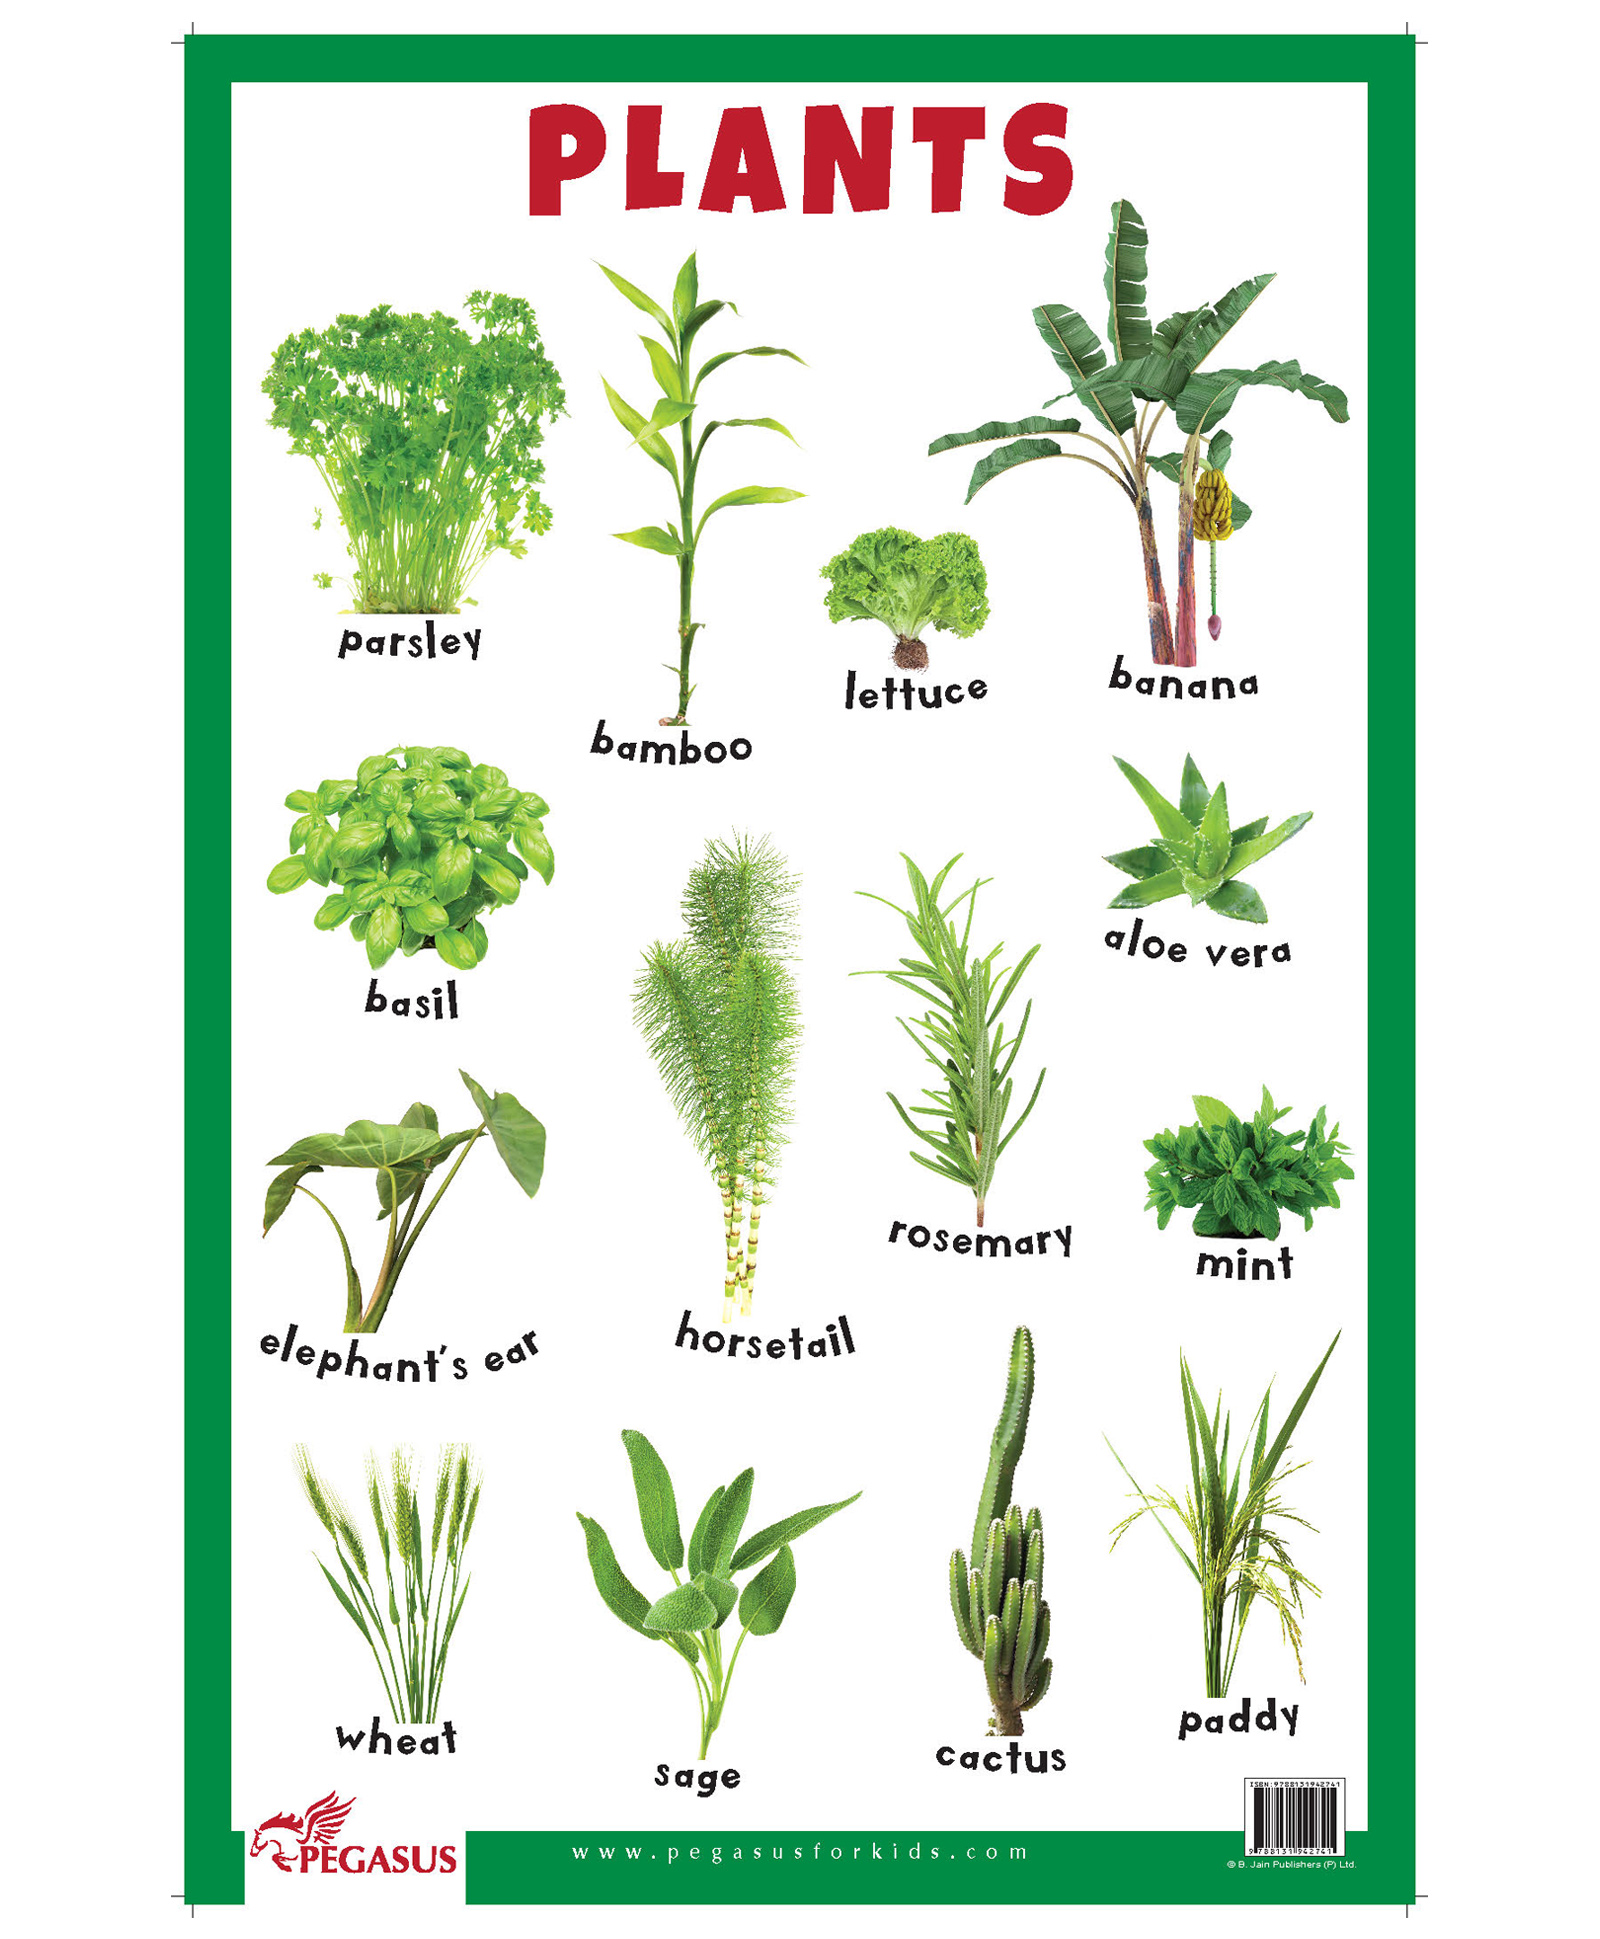 Plants kinds. Растения на английском. Plant names. Plants names in English. Names of Trees in English.